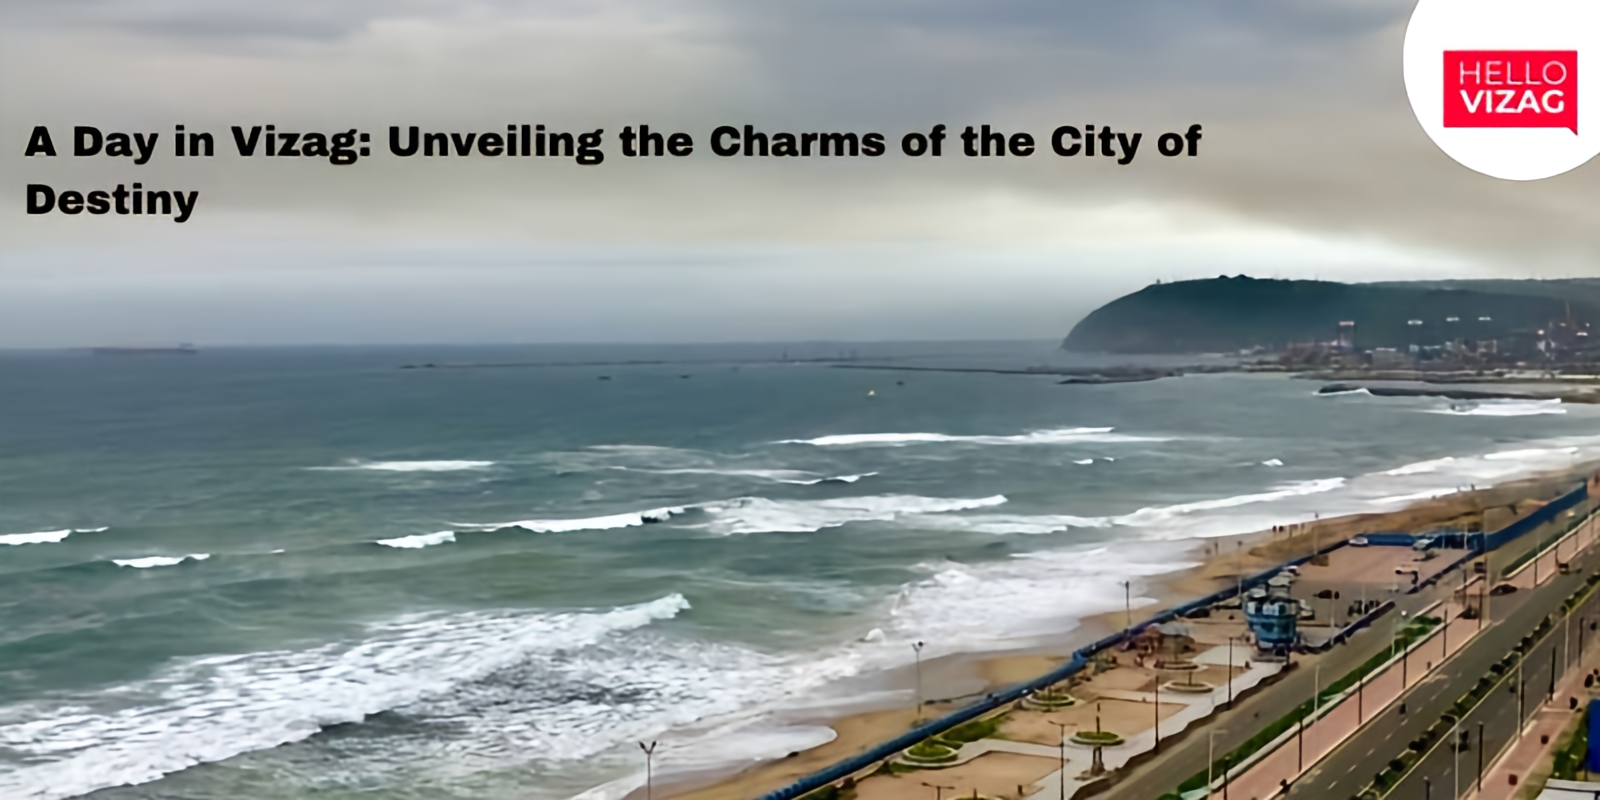 A Day in Vizag: Unveiling the Charms of the City of Destiny